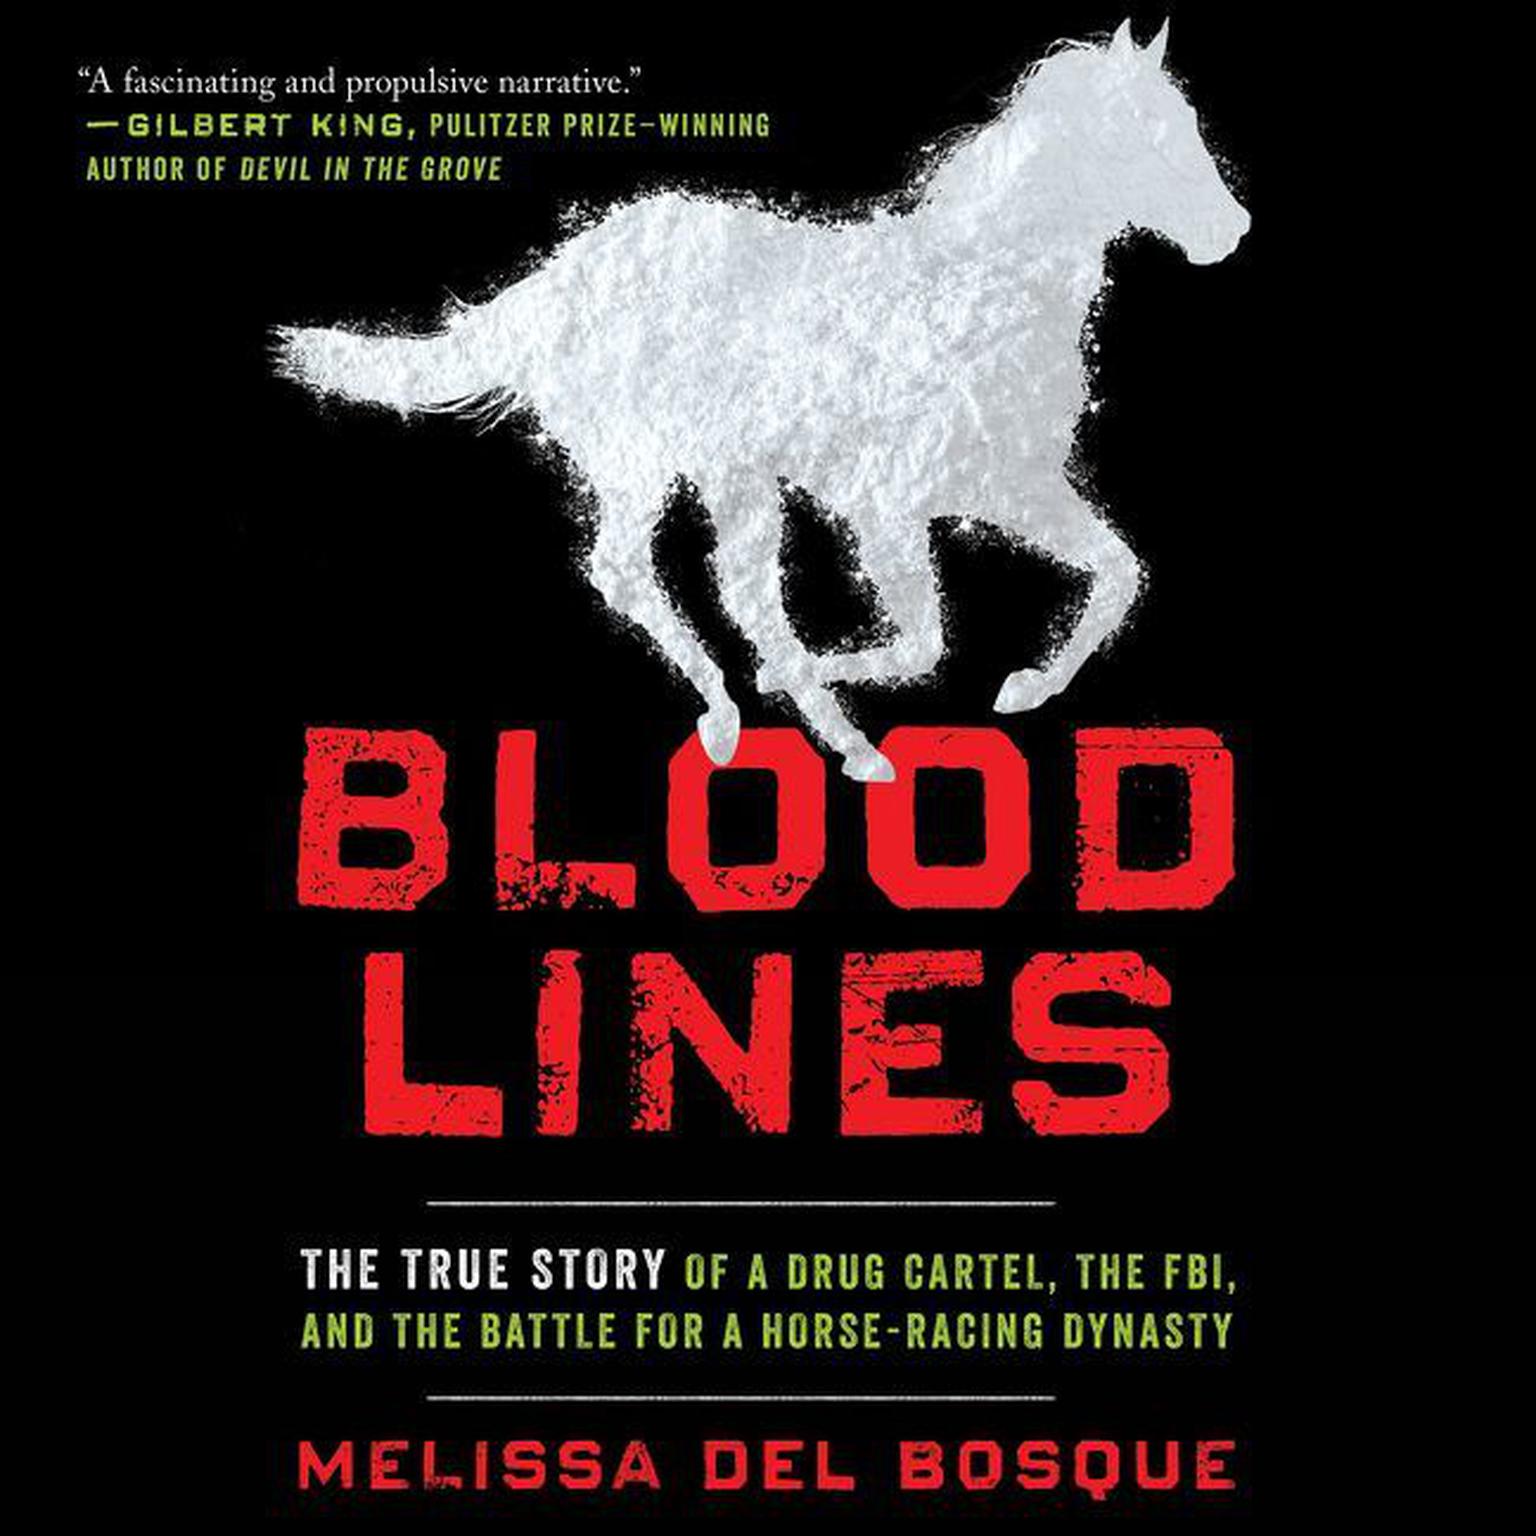 Bloodlines: The True Story of a Drug Cartel, the FBI, and the Battle for a Horse-Racing Dynasty Audiobook, by Melissa del Bosque